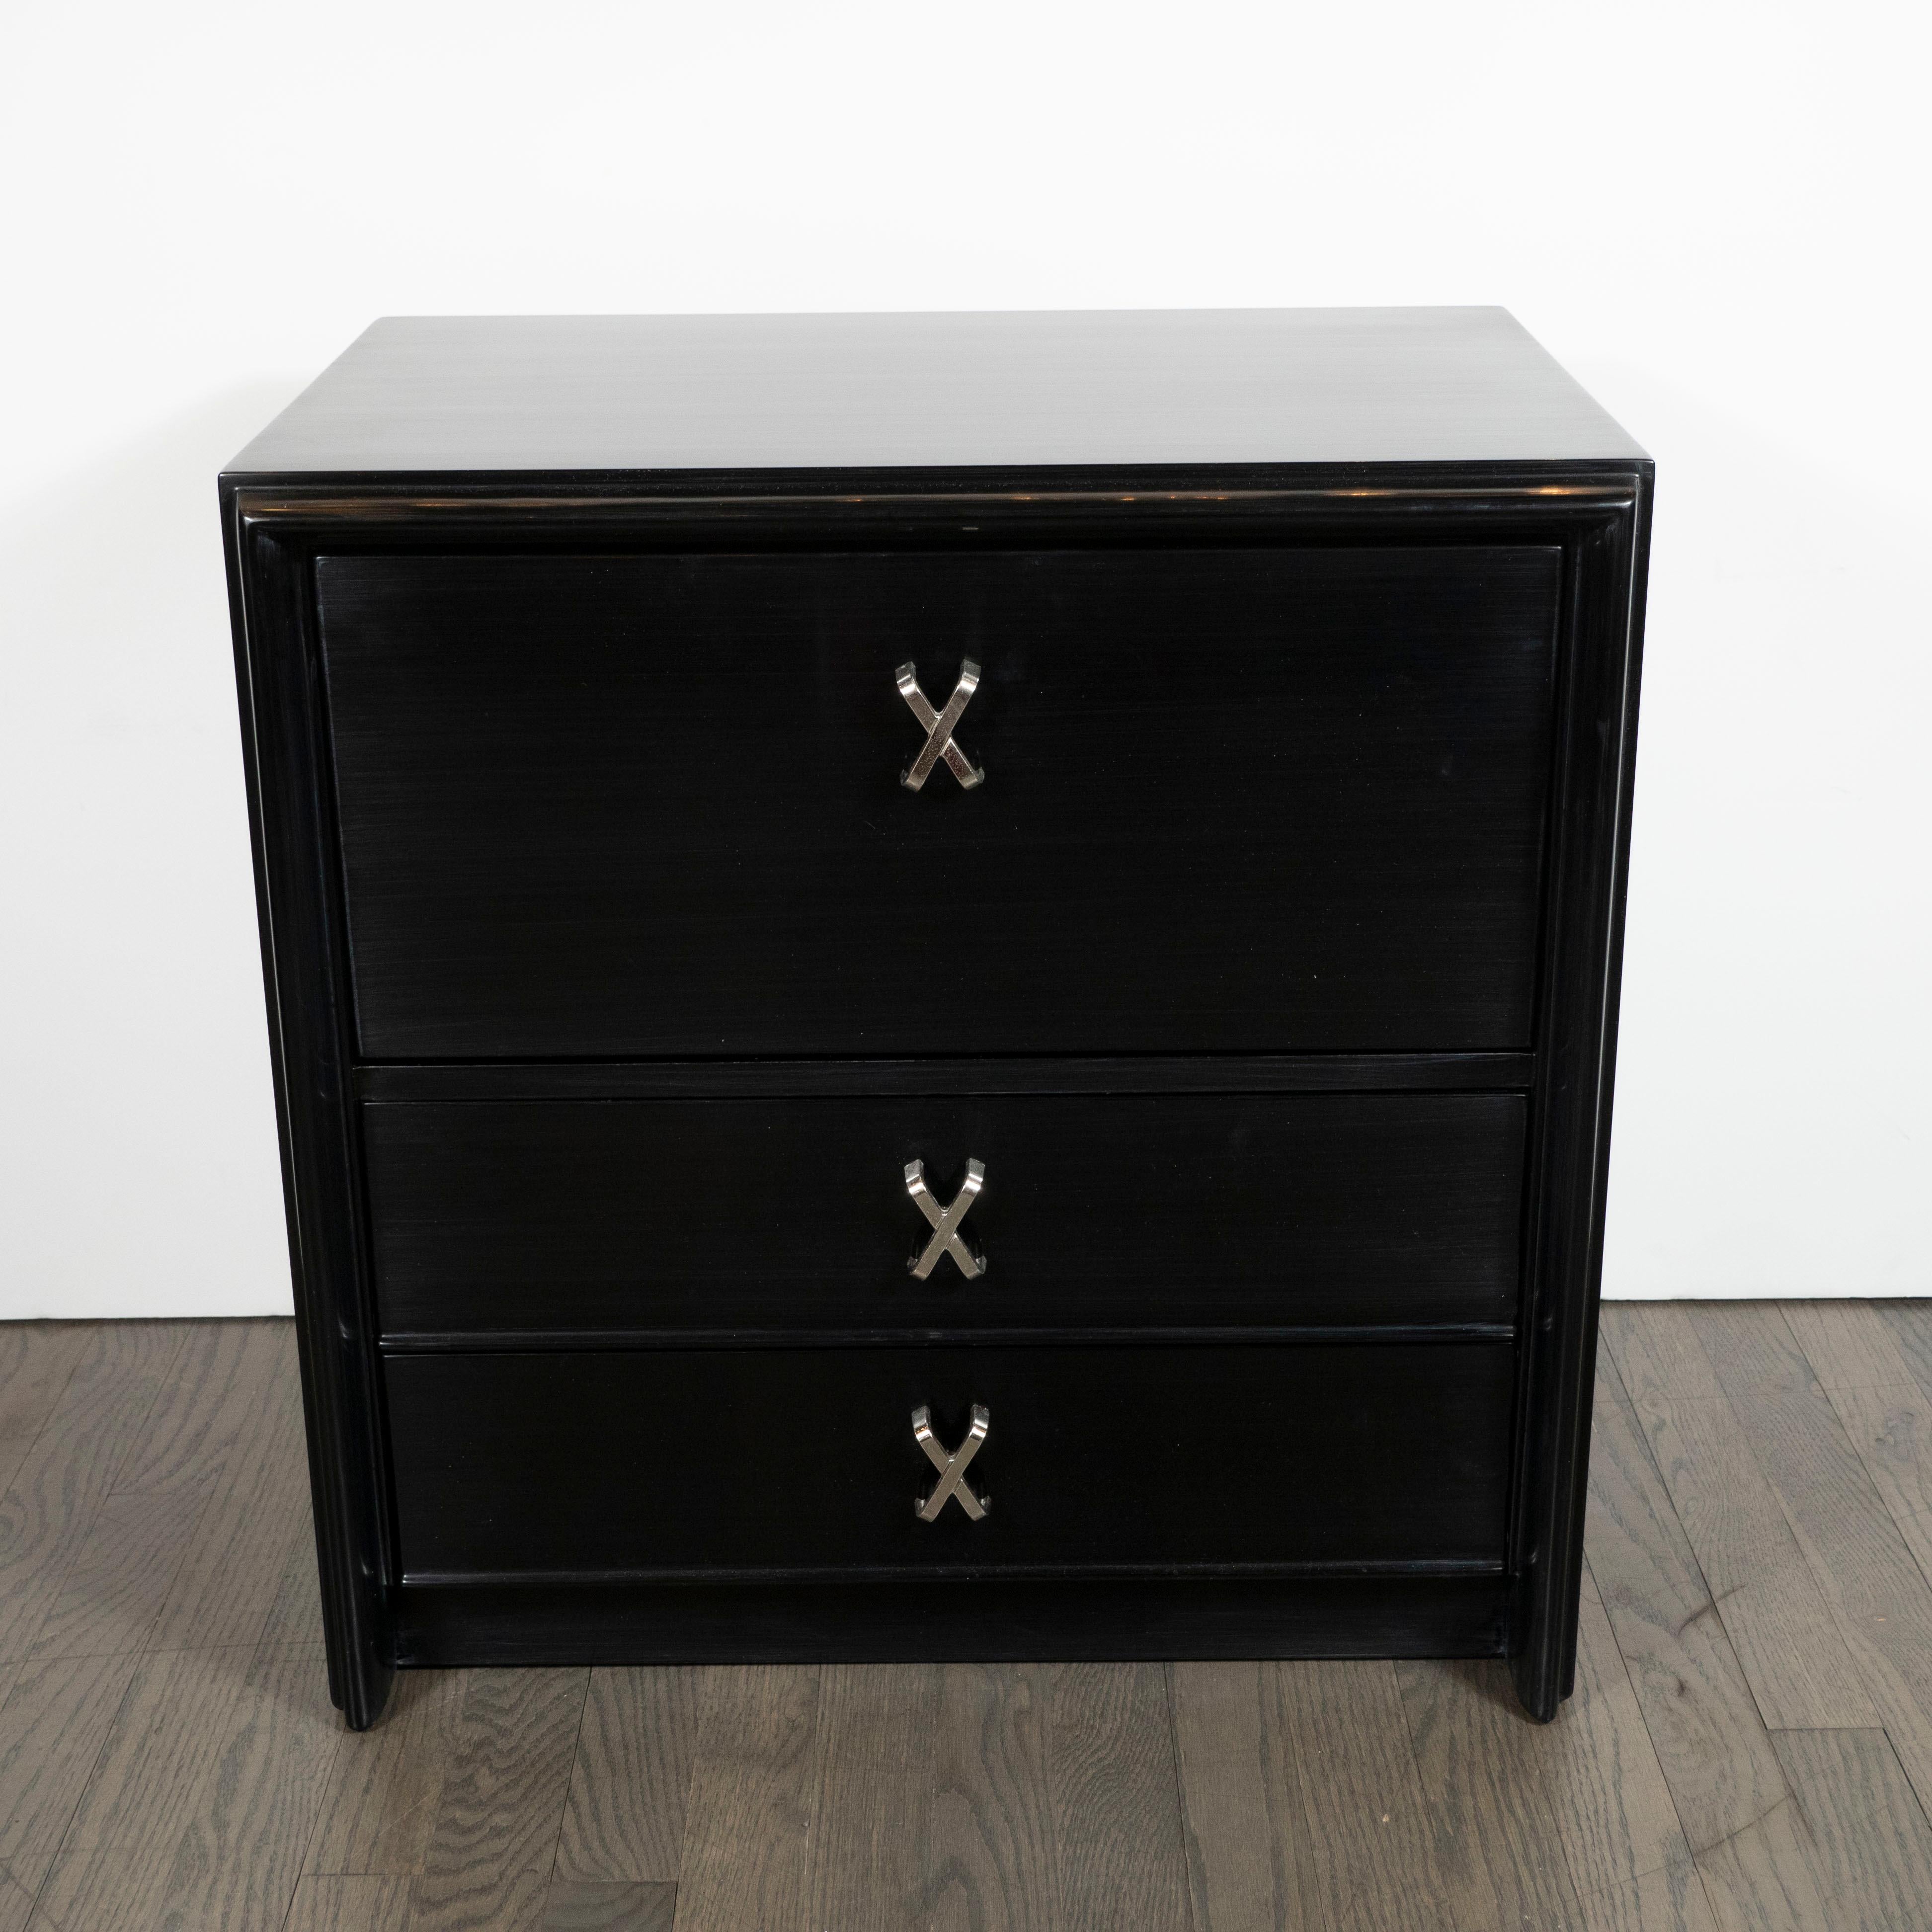 This elegant pair of Mid-Century Modern night stands were designed by the celebrated 20th century designer Paul Frankl and handcrafted in the United States for John Stuart Inc., circa 1960. They feature a hand-rubbed, ebonized finish throughout with